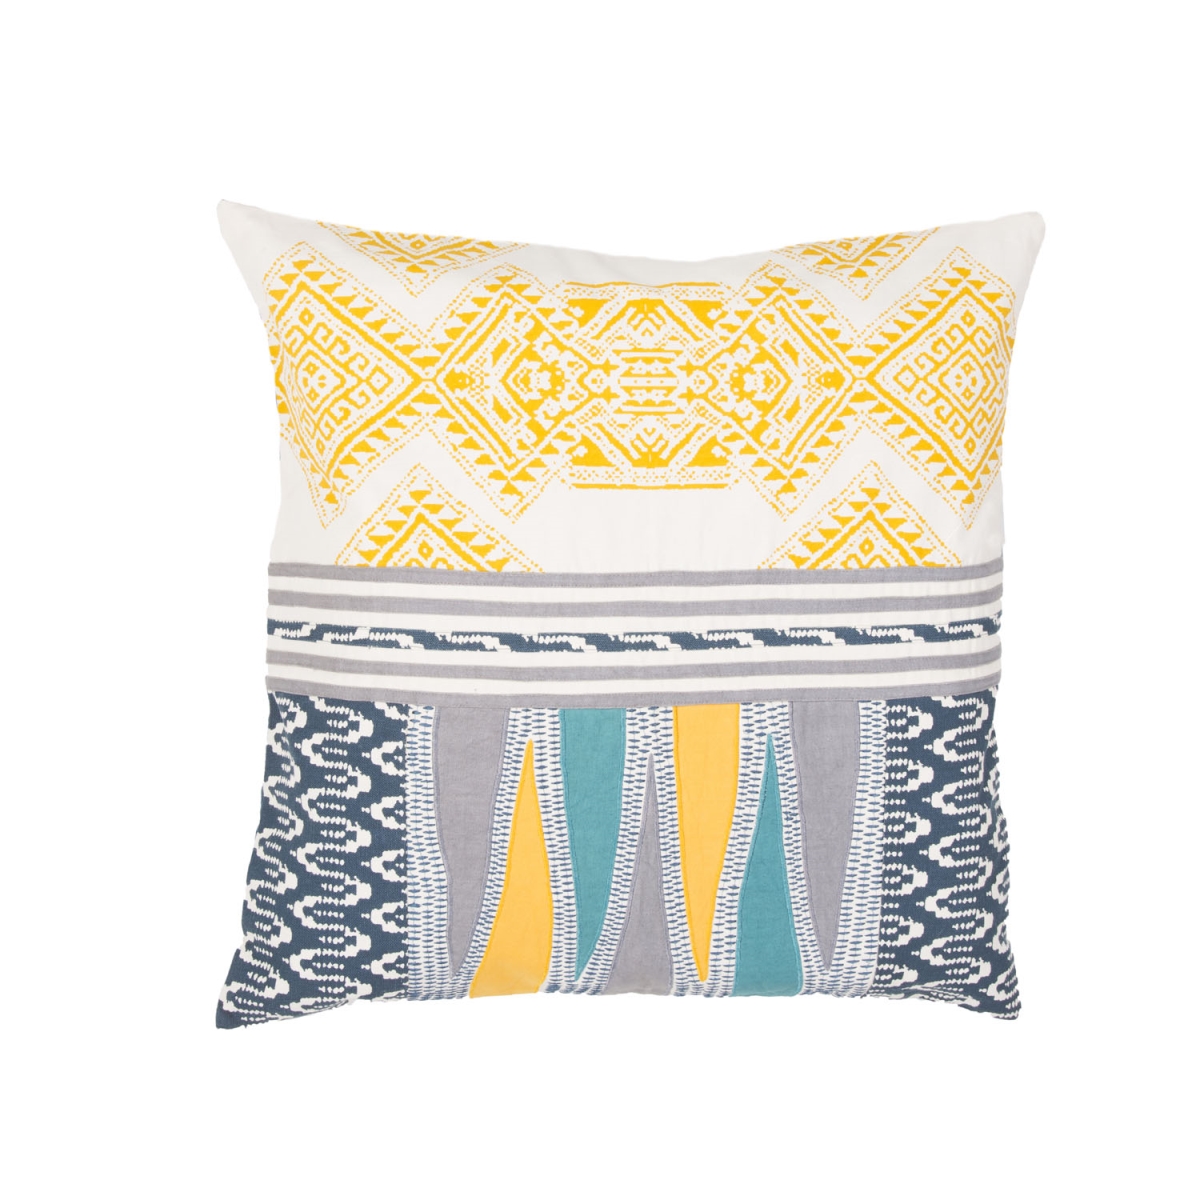 Plw102158 22 X 22 In. Traditions Made Modern Pillows Museum Ifa Mesa Yellow & Teal Geometric Poly Throw Pillow